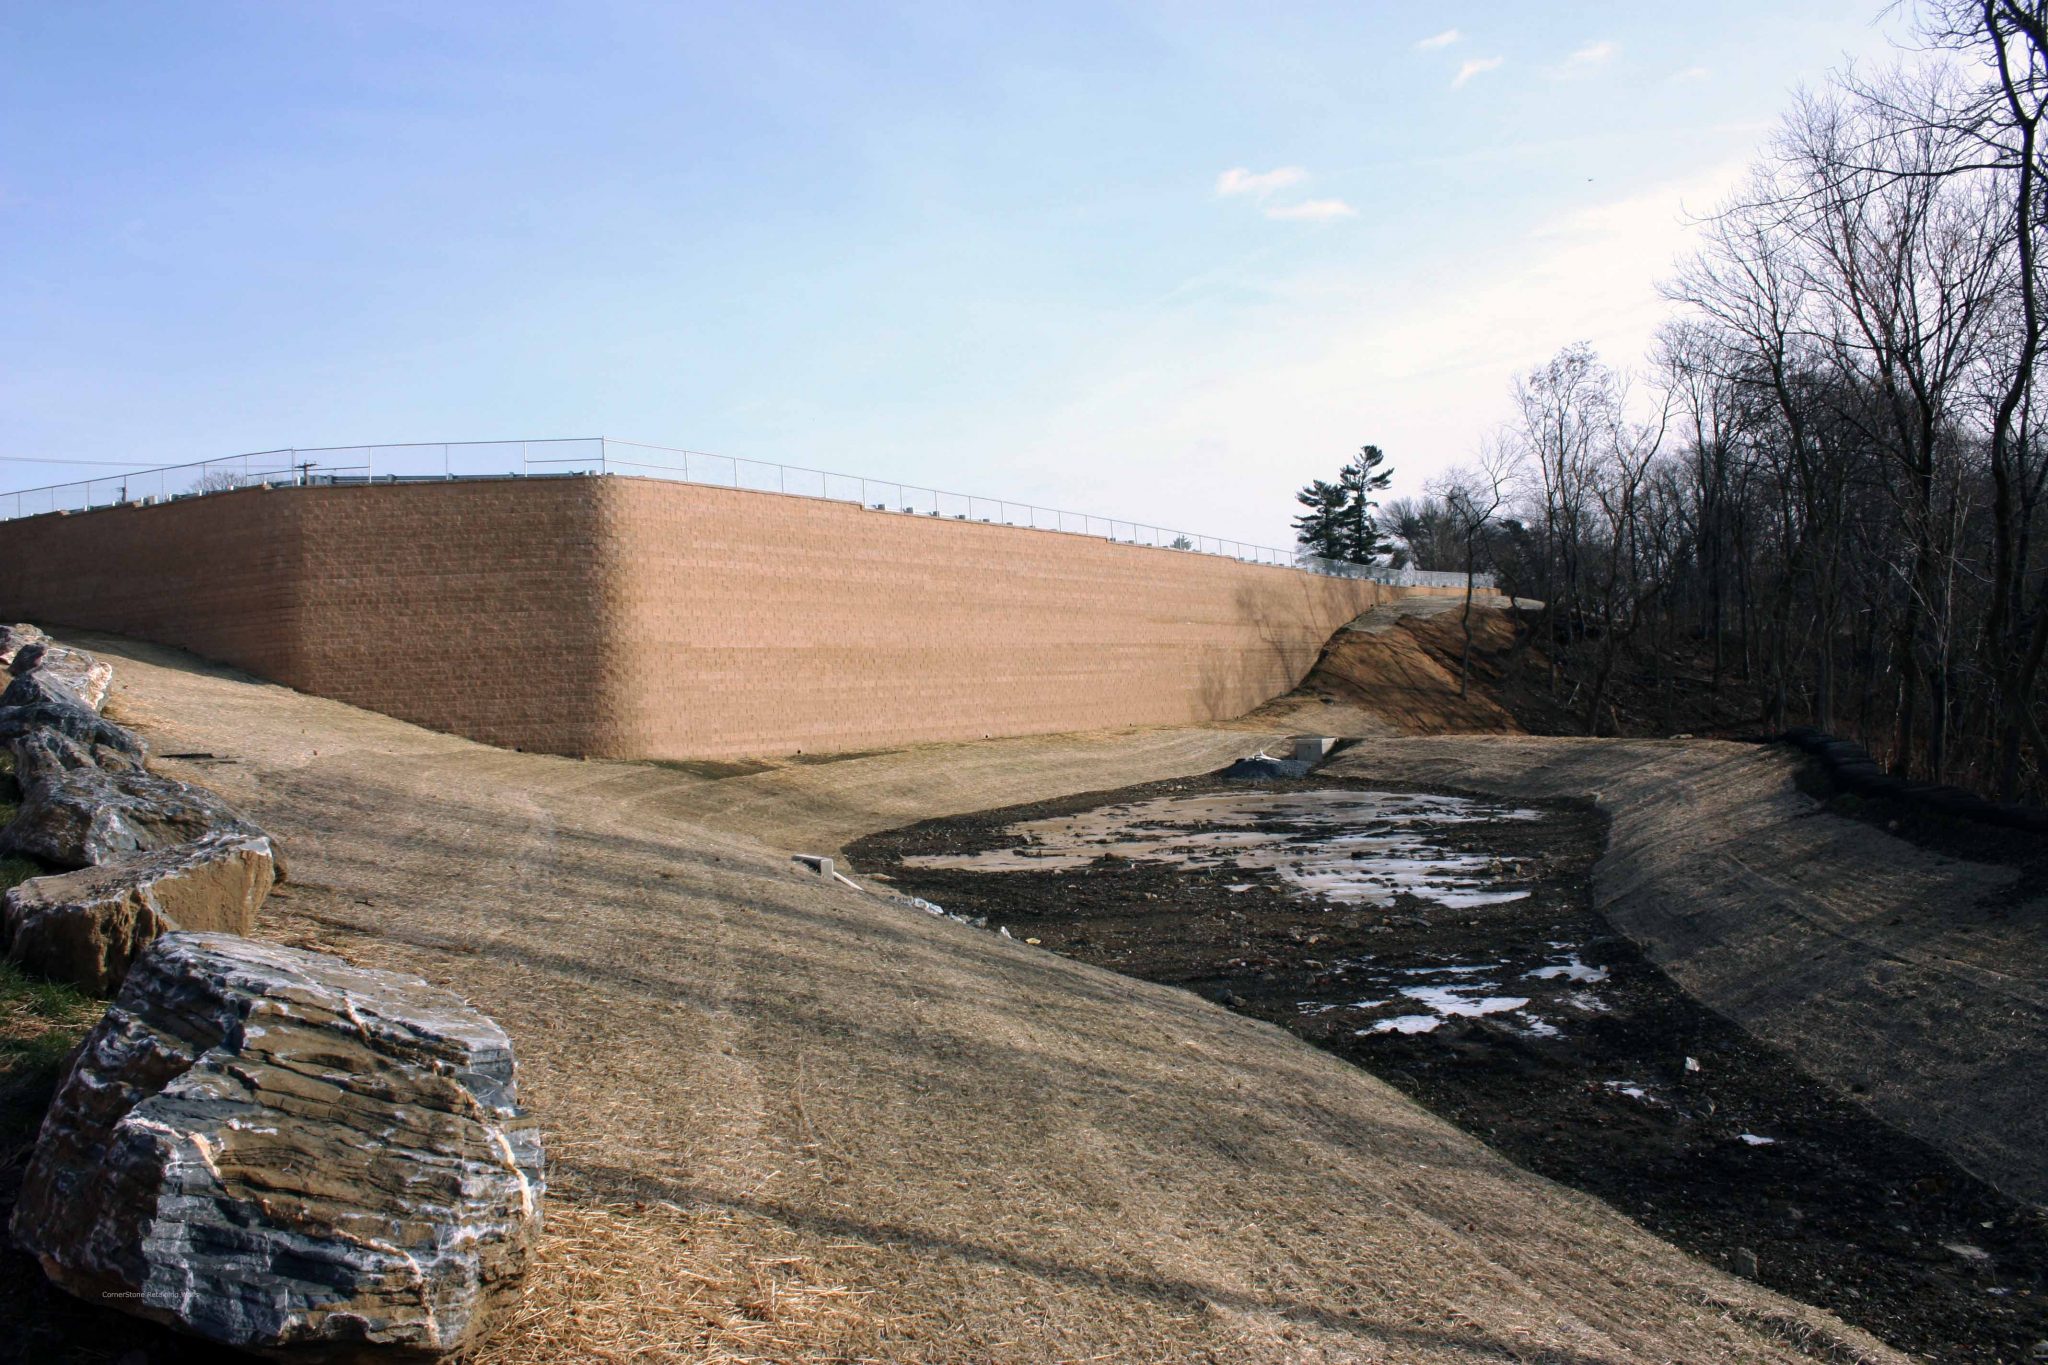 Tall CornerStone Retaining Wall Helps Develop Commercial Infrastructure